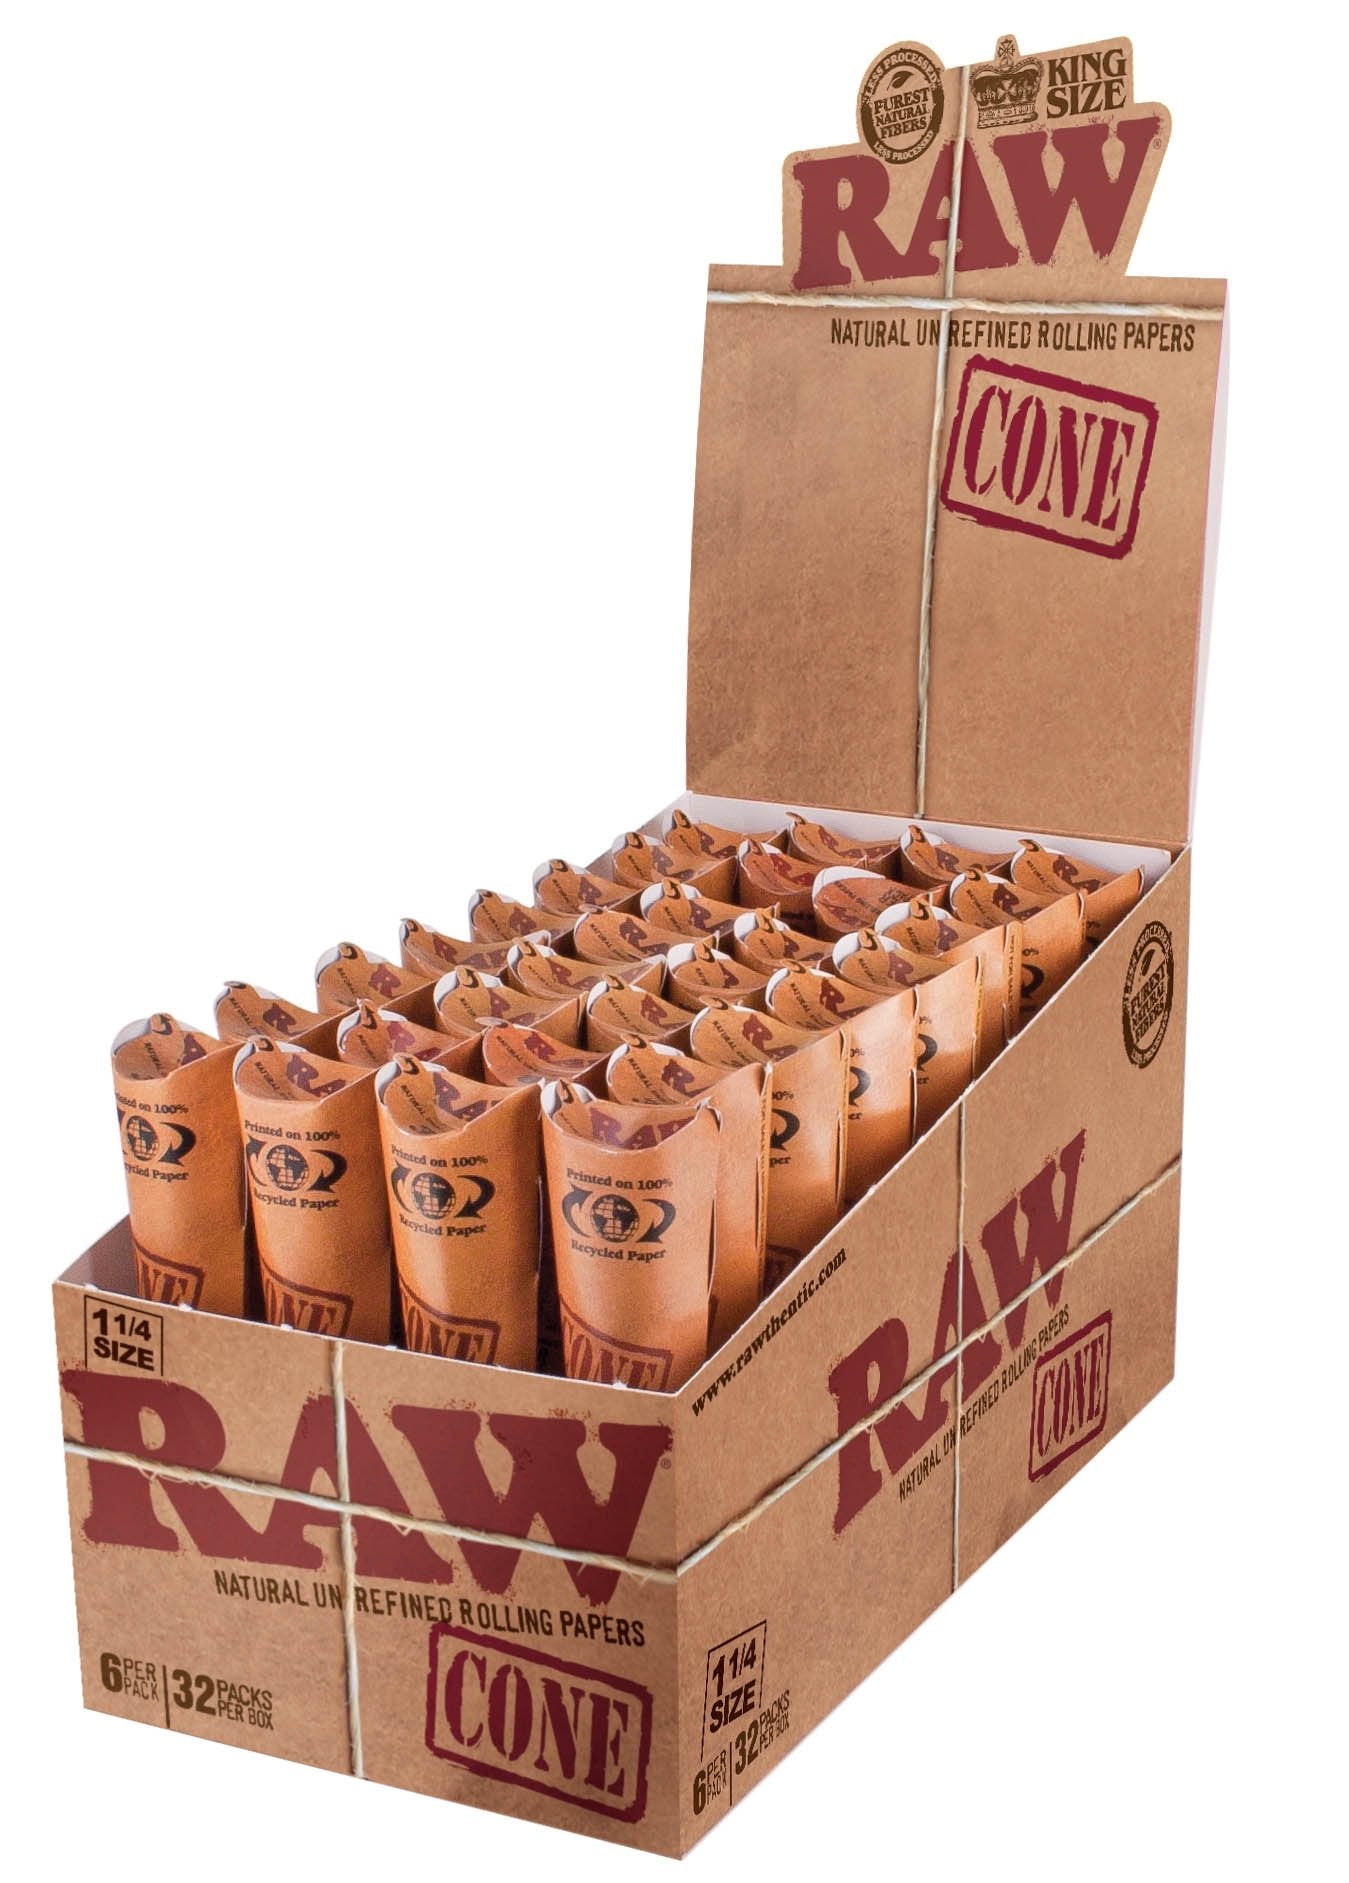 Raw Kingsize 3 x 1Pre Rolled Cones Unbleached